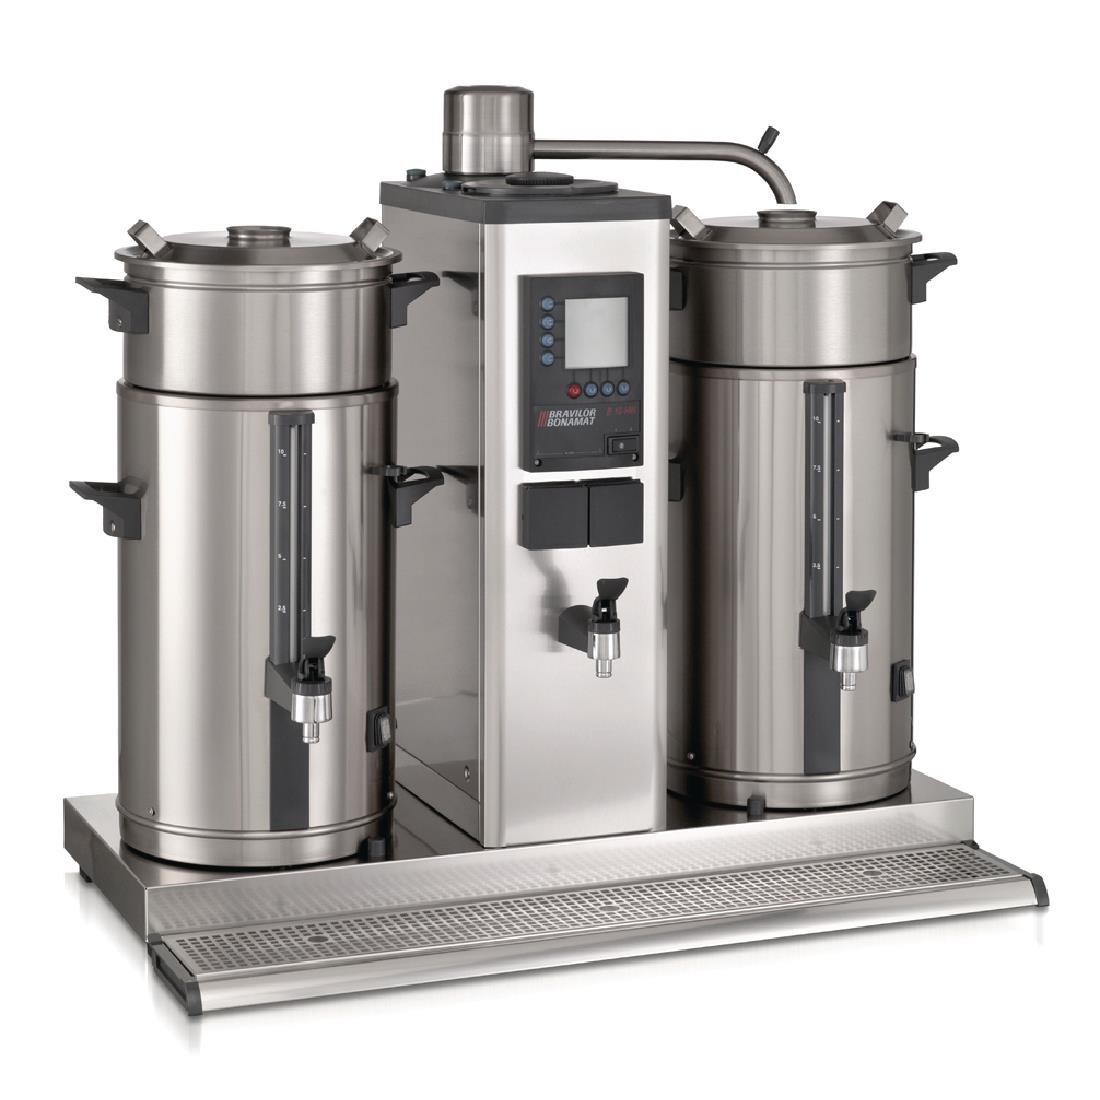 Bravilor B10 HW5 Bulk Coffee Brewer with 2x10Ltr Coffee Urns and Hot Water Tap 3 Phase - DC690-3P50  - 3